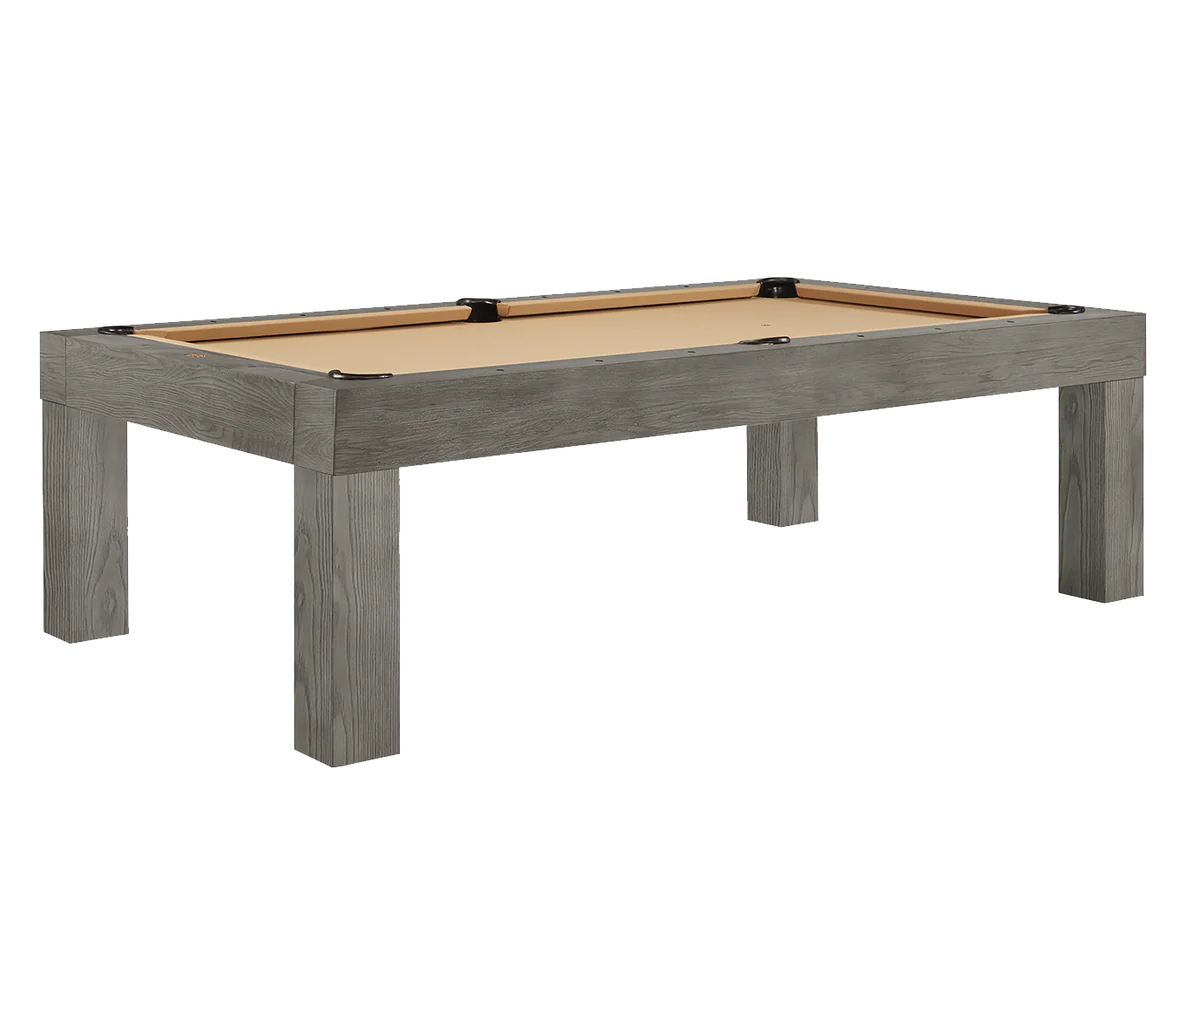 ALTA 8FT Pool Table - Charcoal Finish